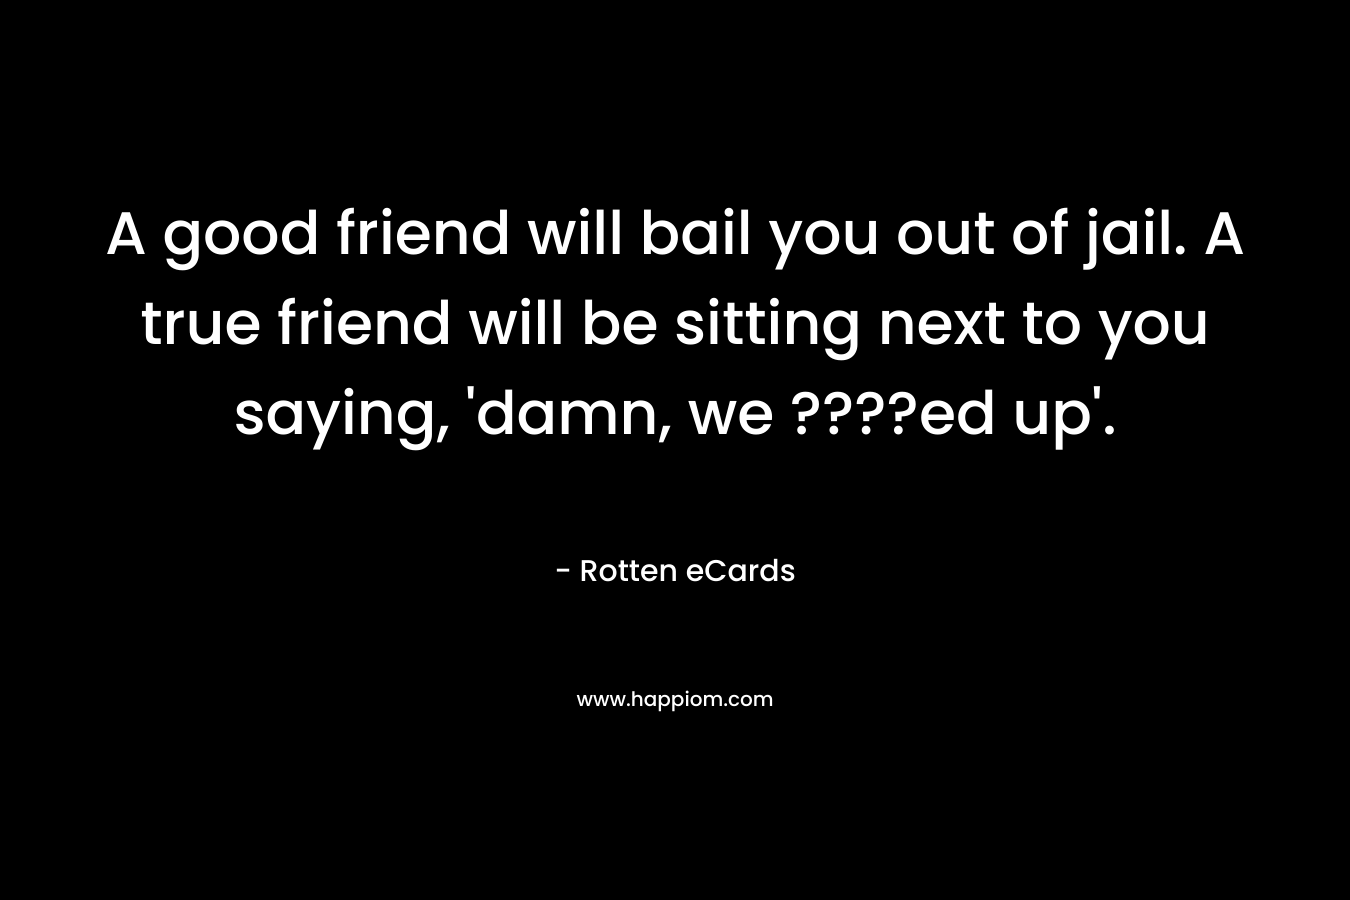 A good friend will bail you out of jail. A true friend will be sitting next to you saying, 'damn, we ????ed up'.